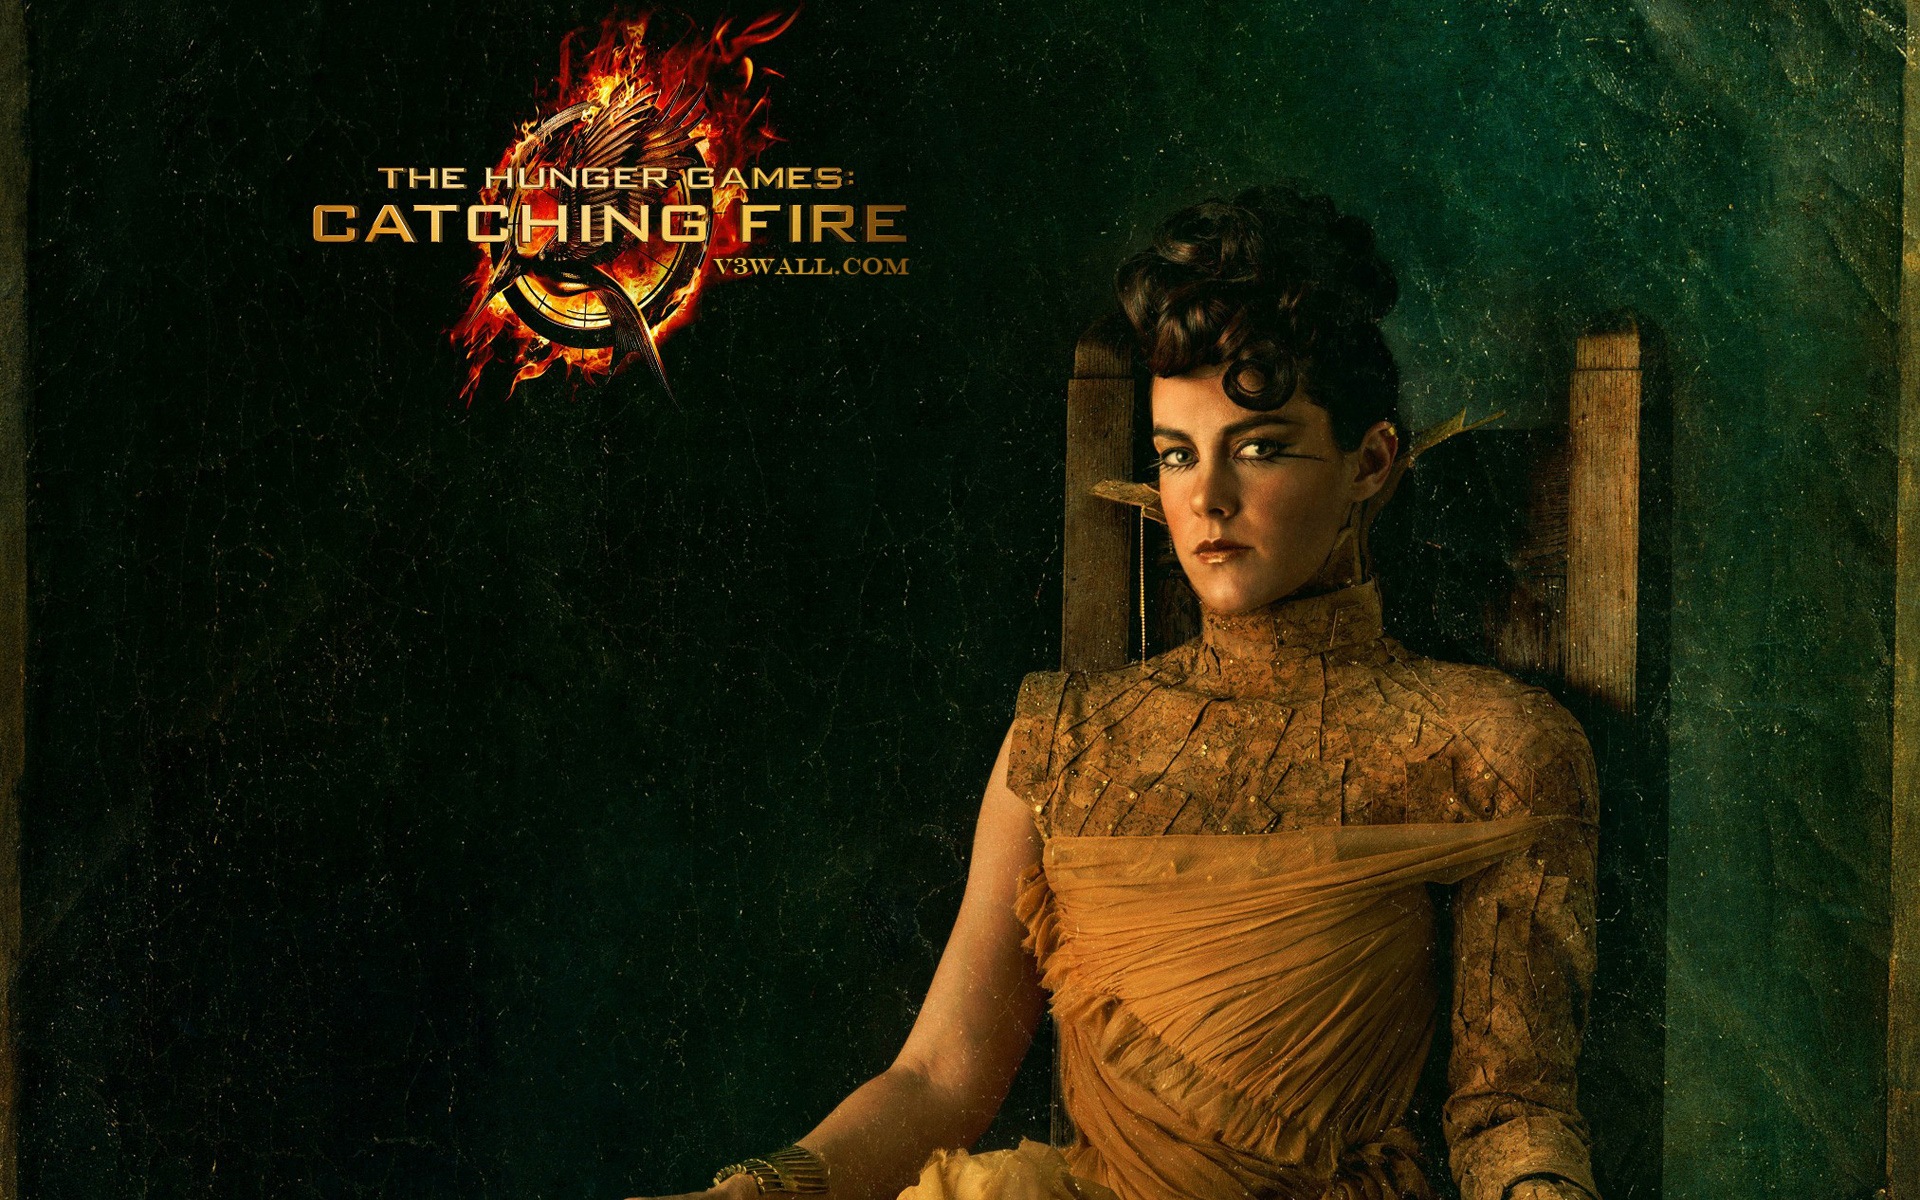 The Hunger Games: Catching Fire wallpapers HD #16 - 1920x1200